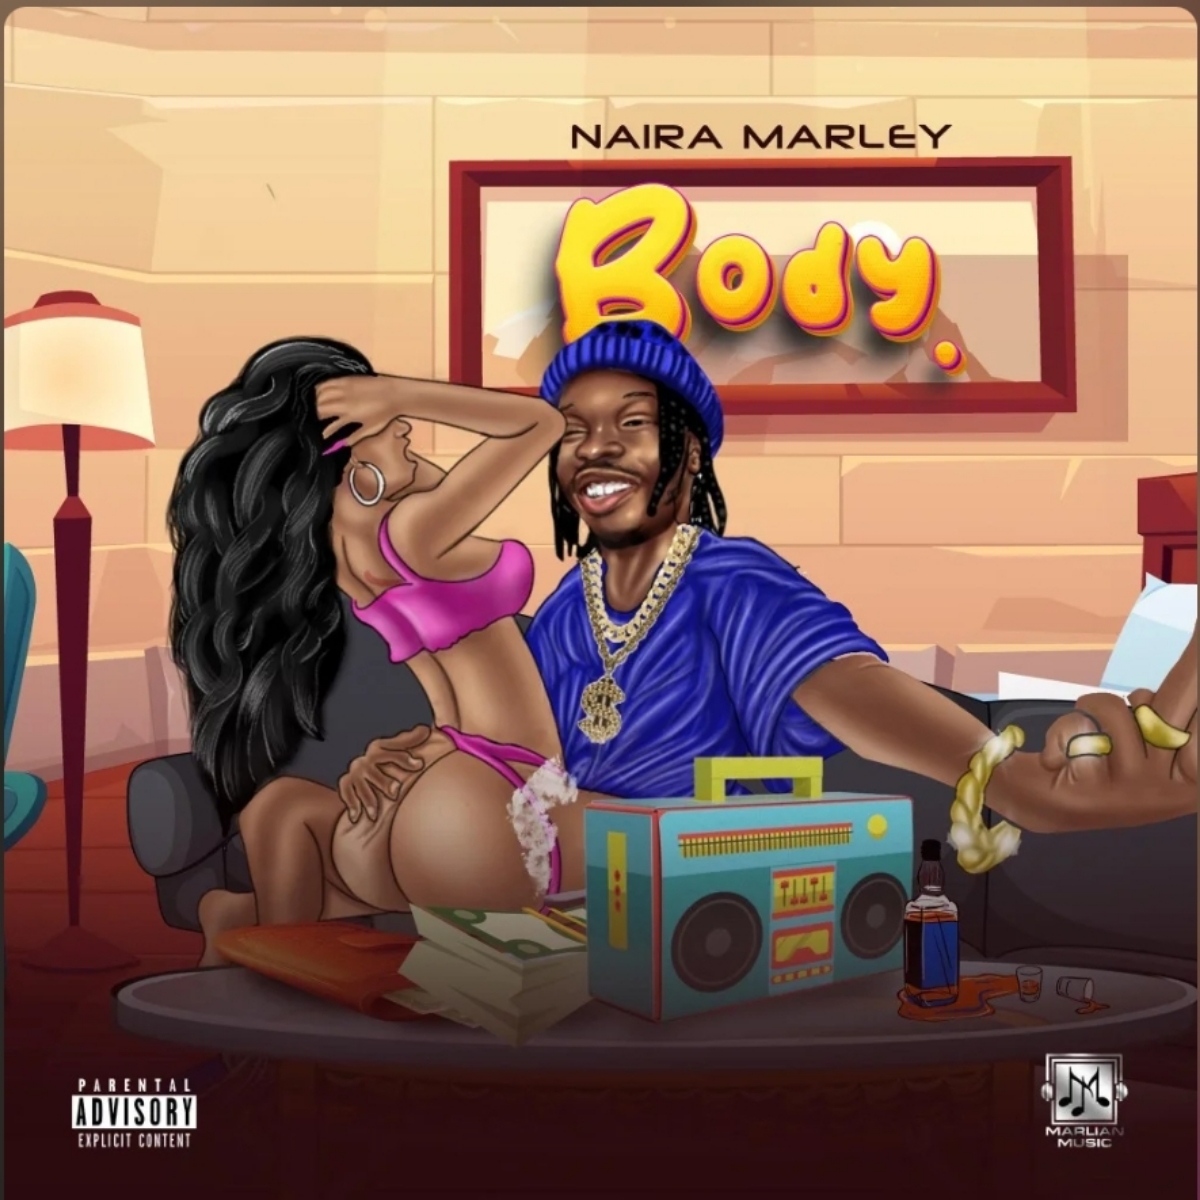 Naira Marley - Body (Official Video)